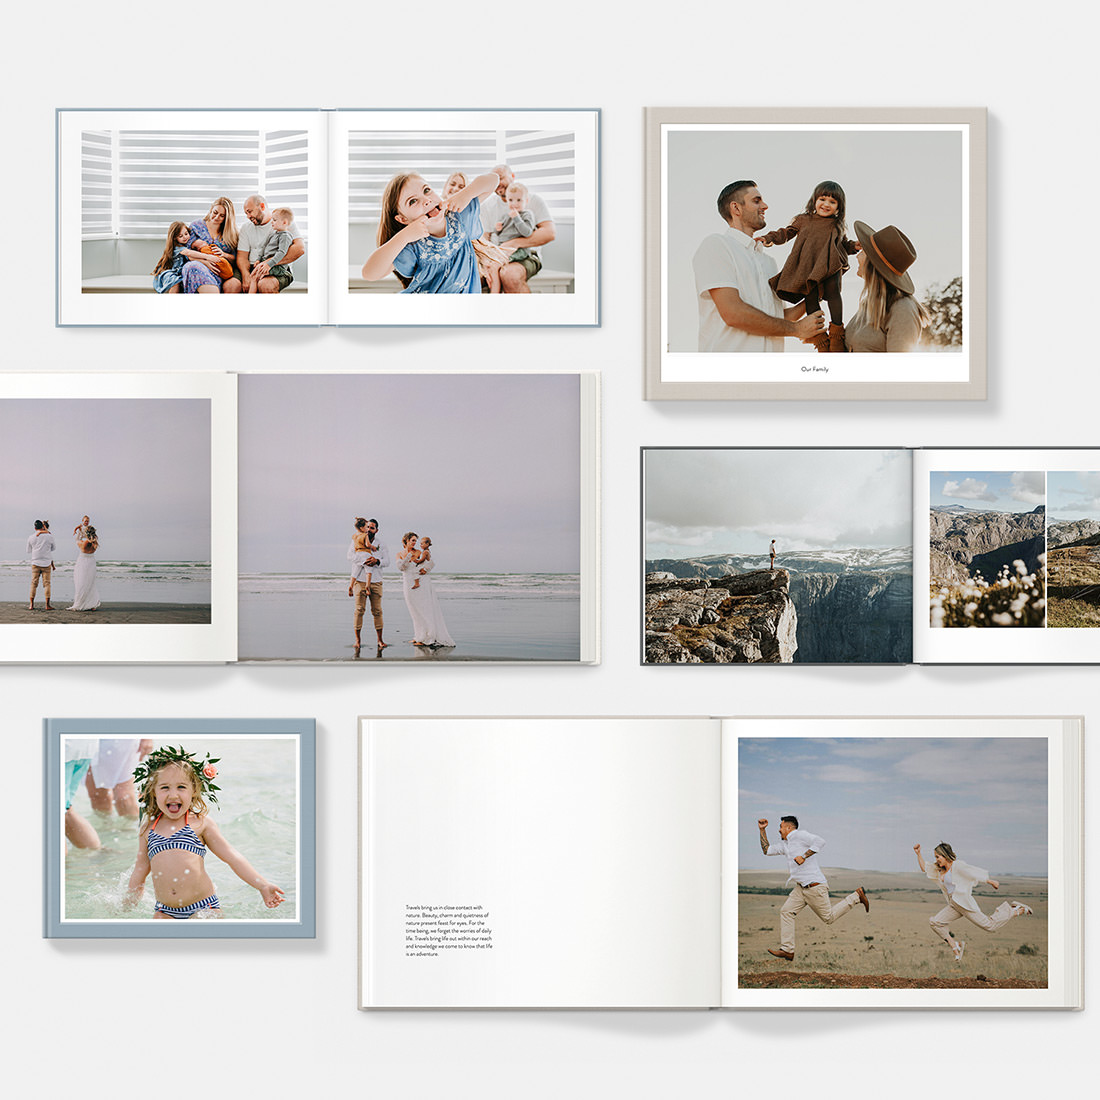 Range of classic photo books with various spread designs.